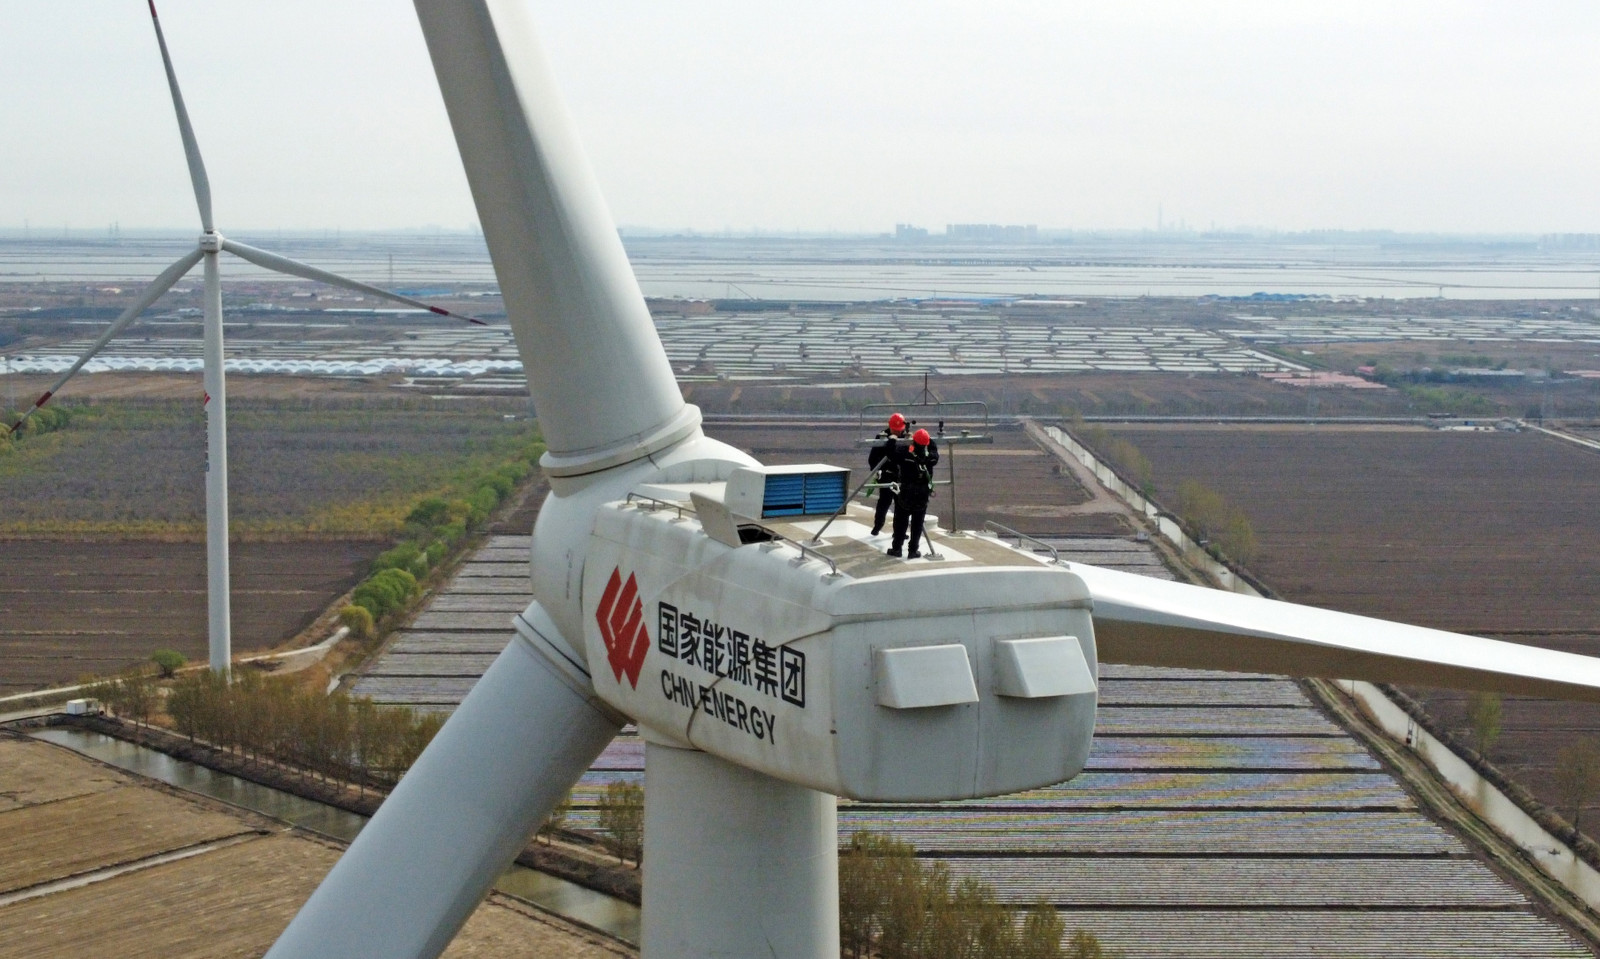 Two human figures are seen standing on a platform behind the three large blades of a wind turbine